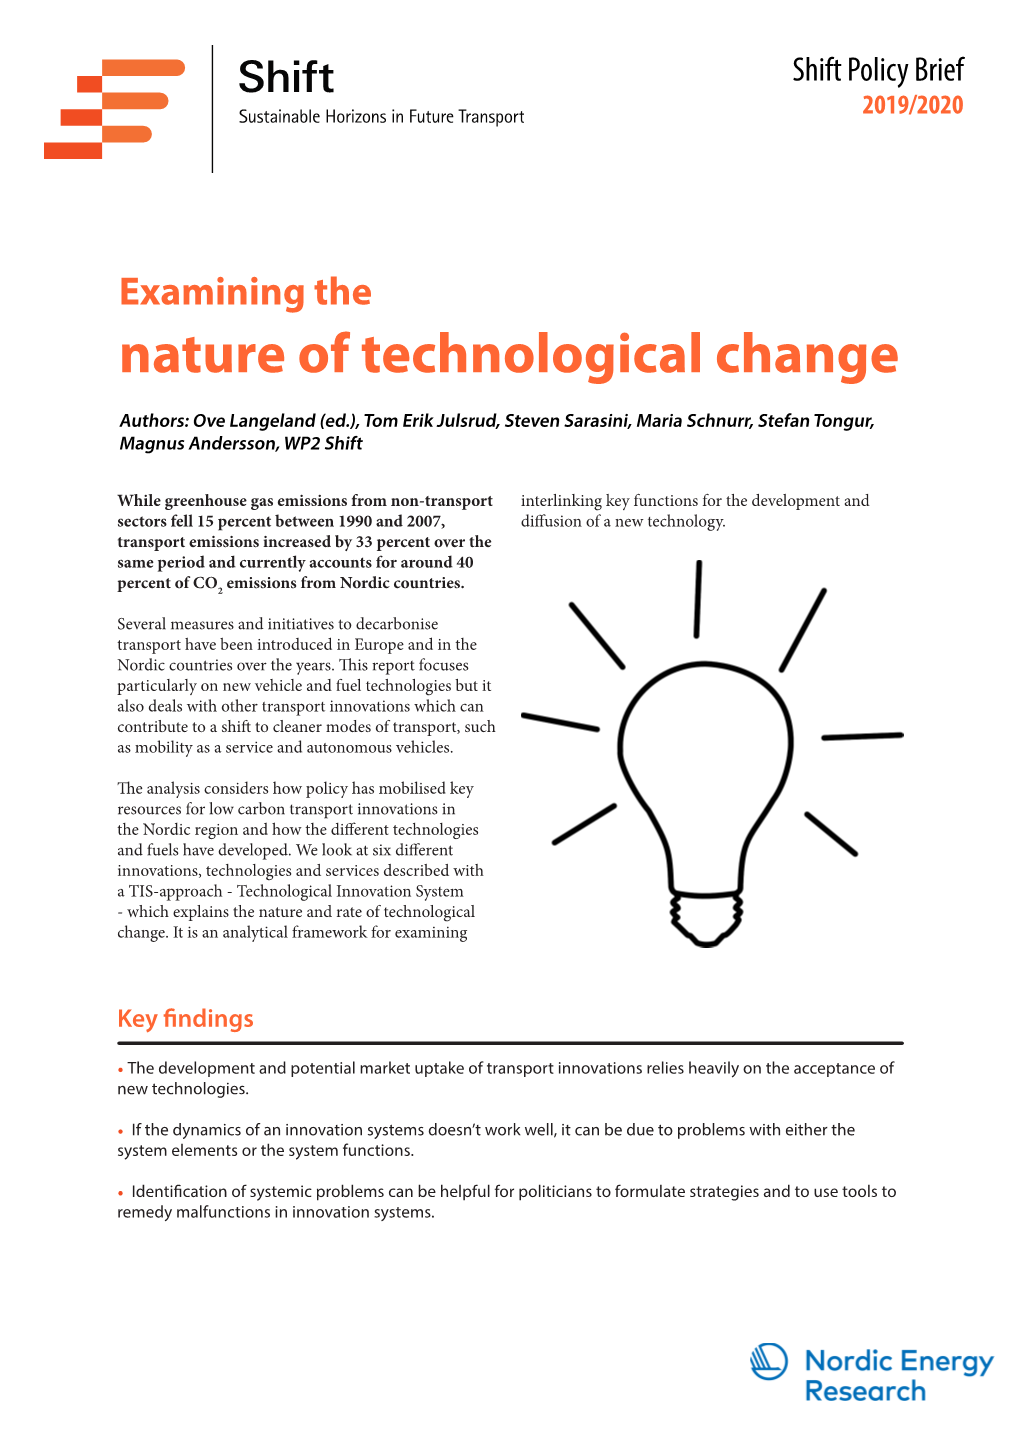 Examining the Nature of Technological Change